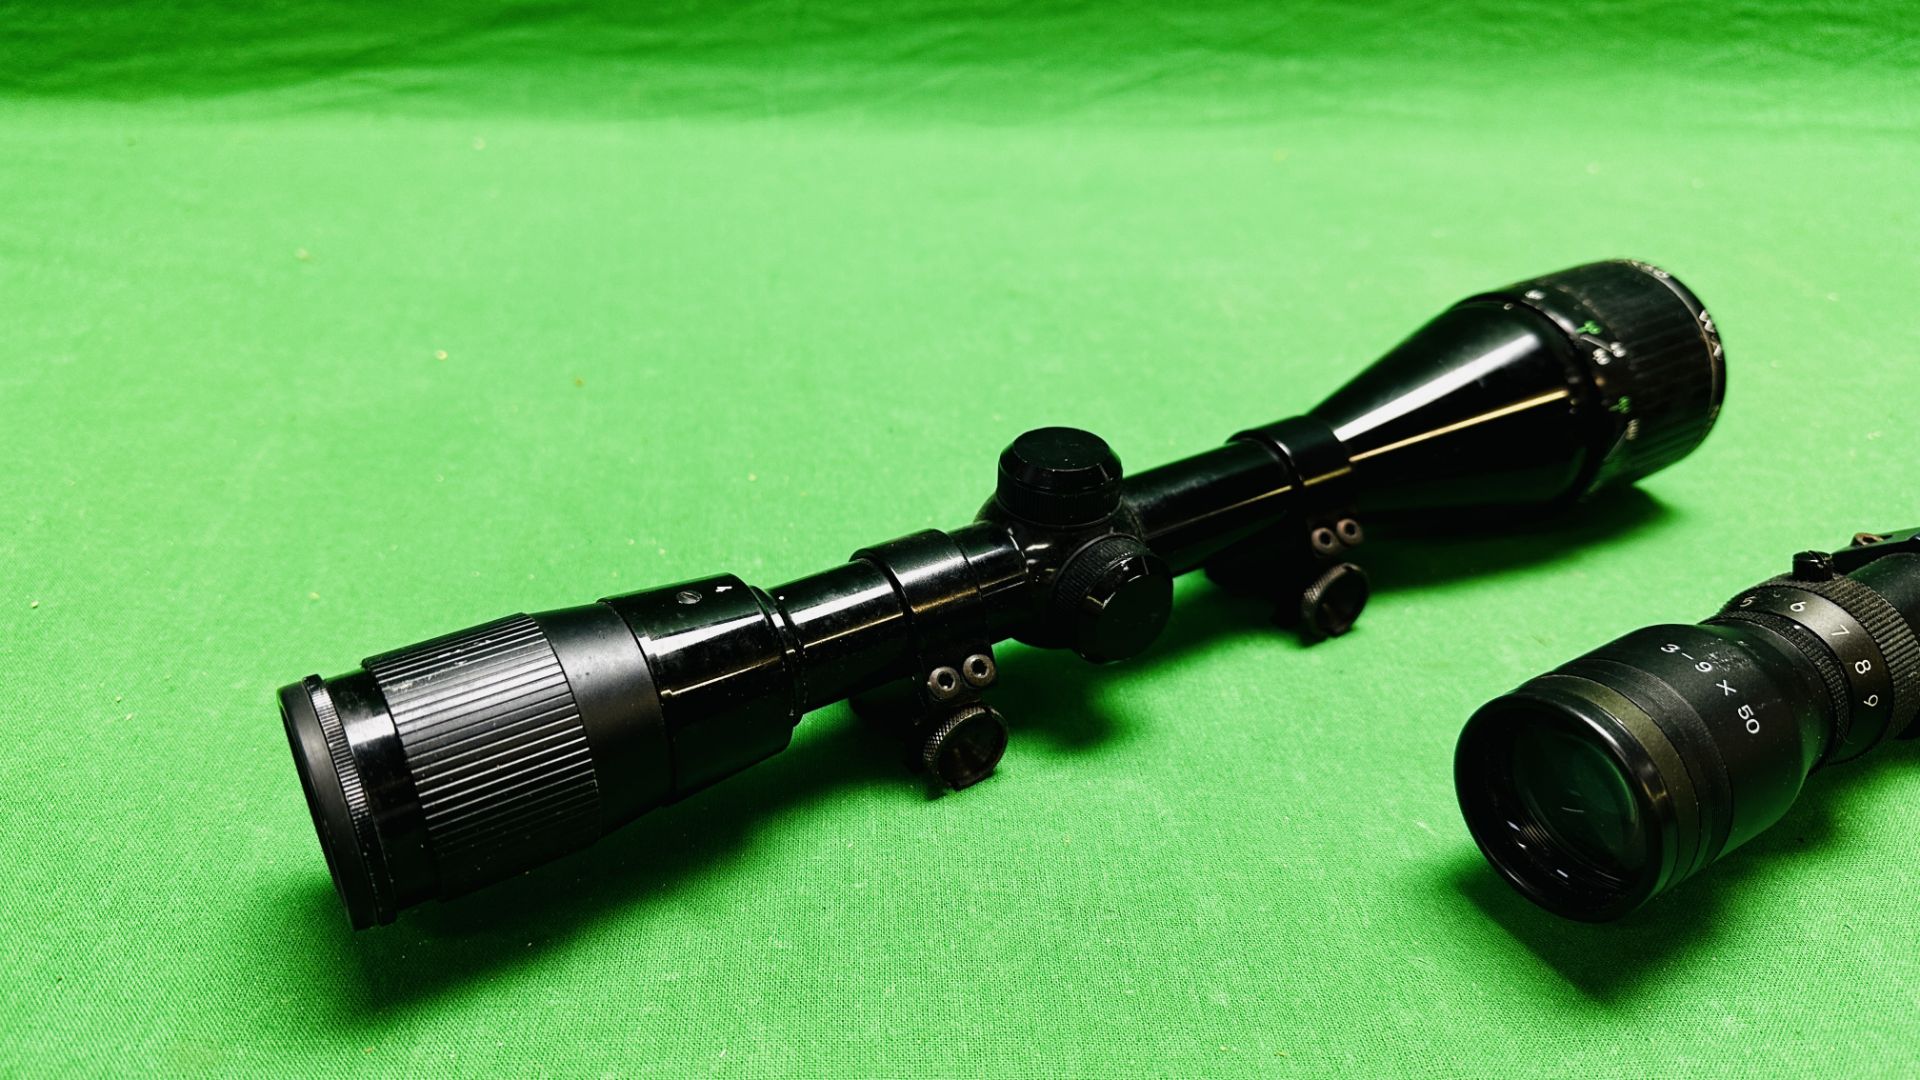 TWO RIFLE SCOPES TO INCLUDE NIKKO STIRLING PLATINUM 4-12X50 WA WITH MOUNTS AND ONE OTHER 3-9X50 - Image 8 of 8